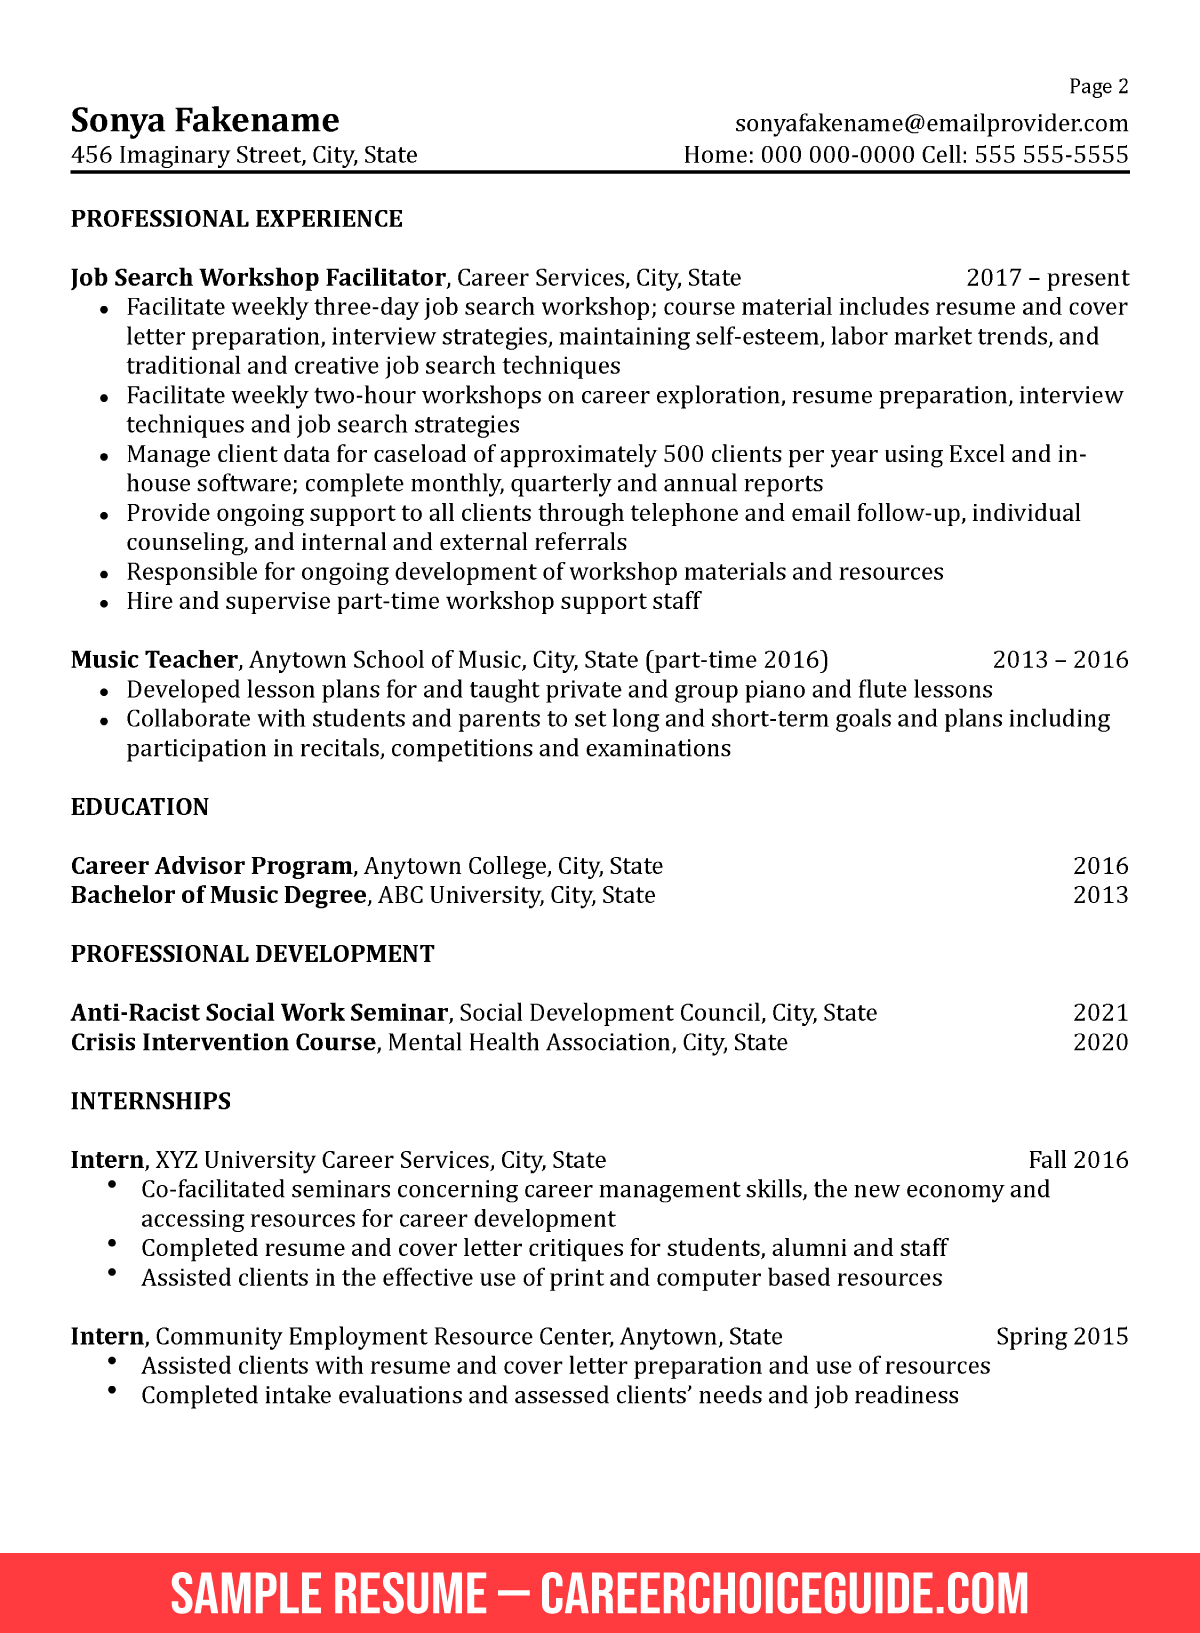 resume format for counsellor job